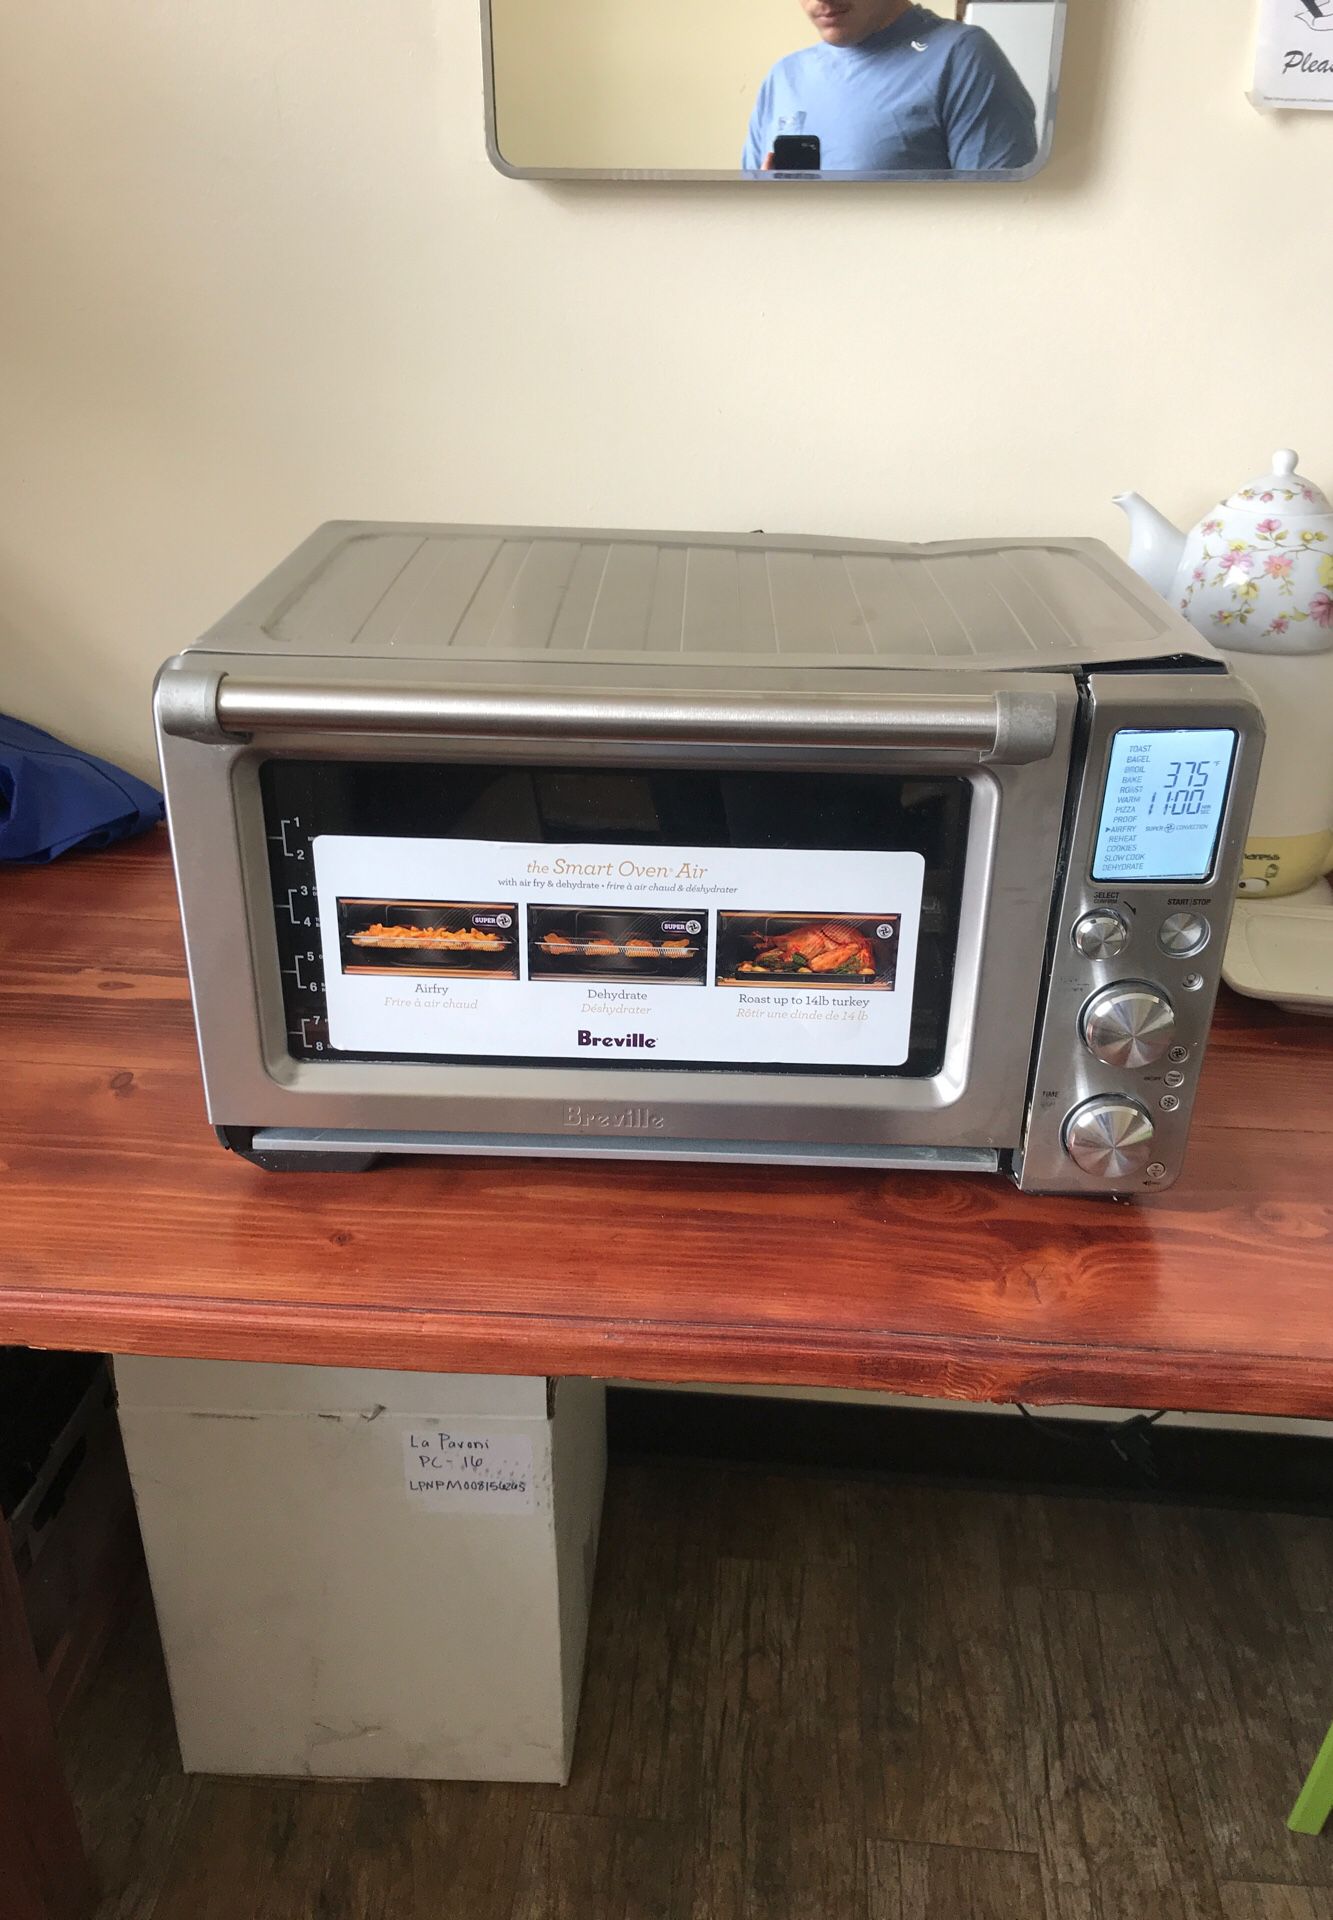 Cosmetically dented Breville BOV900BSS Convection and Air Fry Smart Oven Air, Brushed Stainless Steel with trays still in the bag